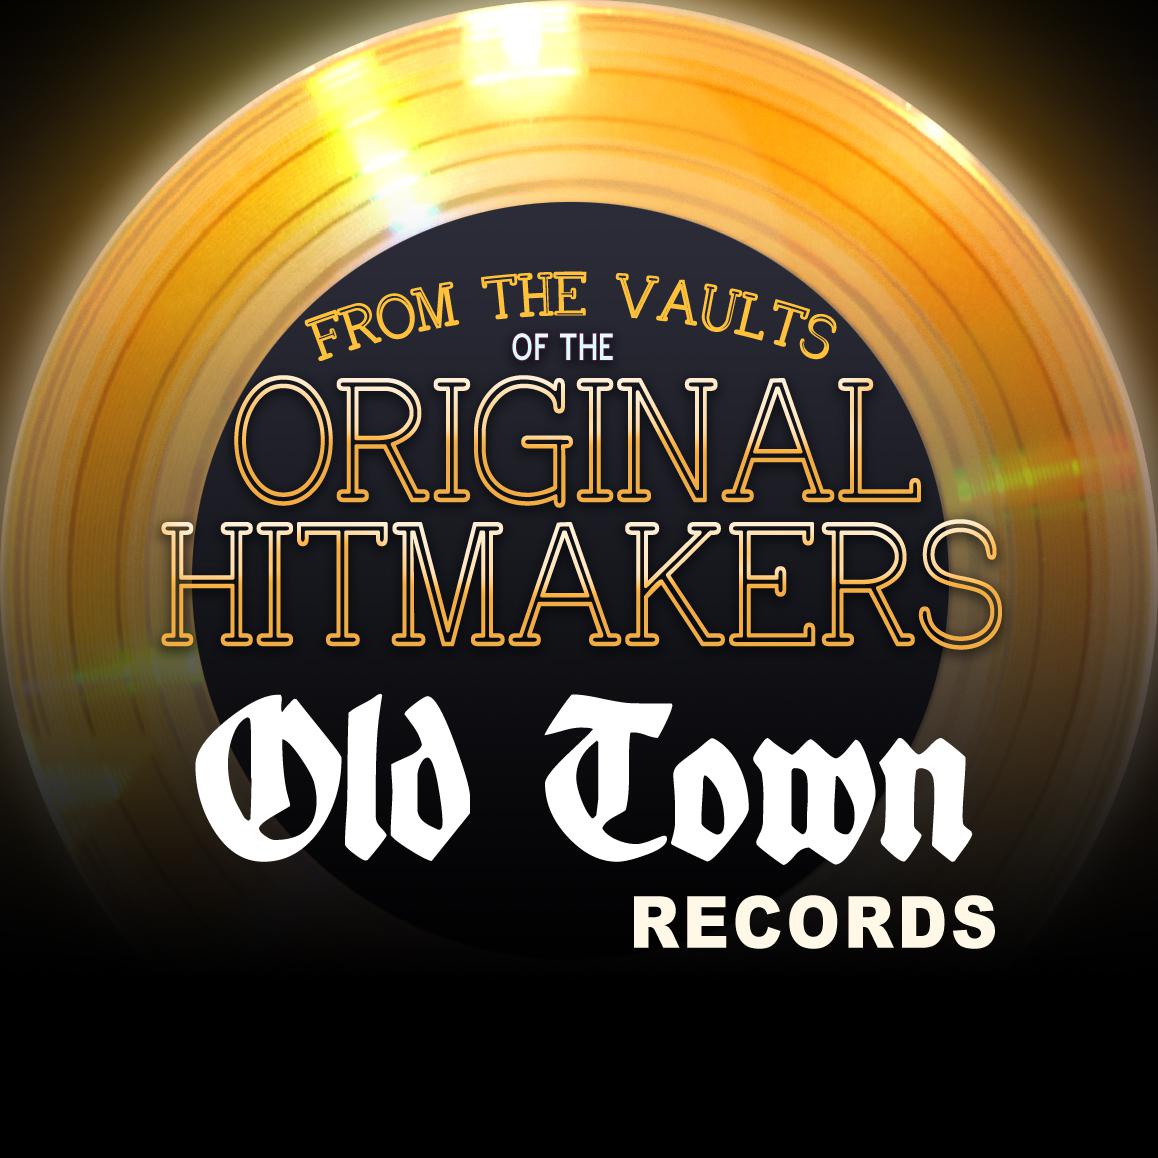 From the Vaults of the Original Hitmakers - Old Town Records